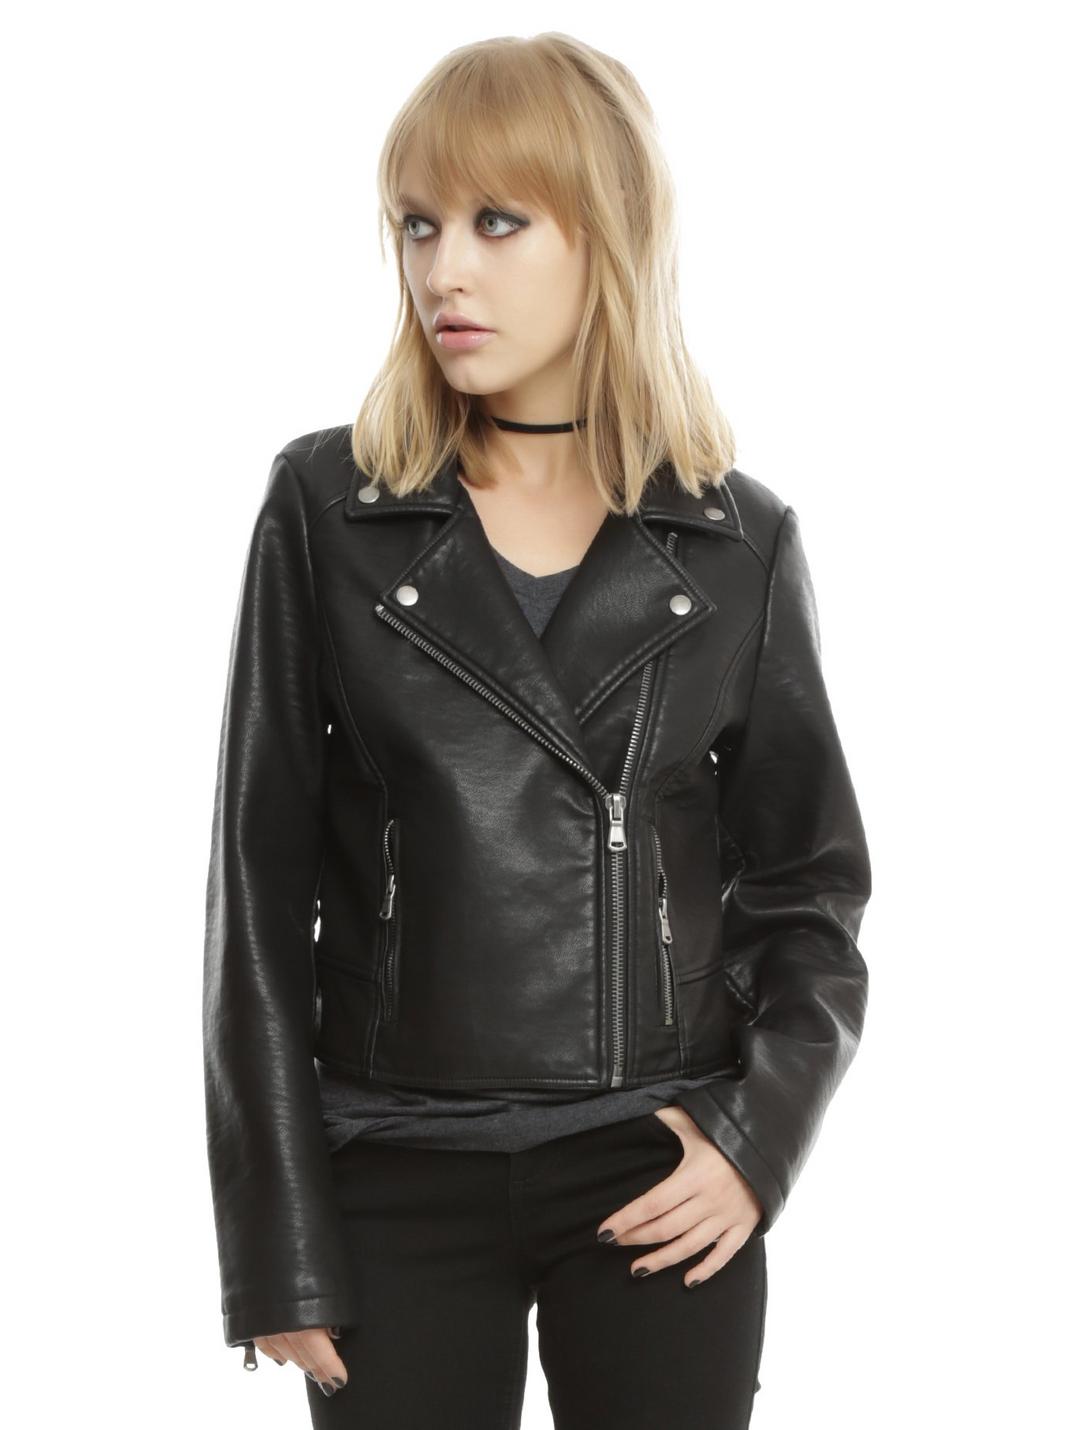 Black Faux Leather Girls Motorcycle Jacket | Hot Topic